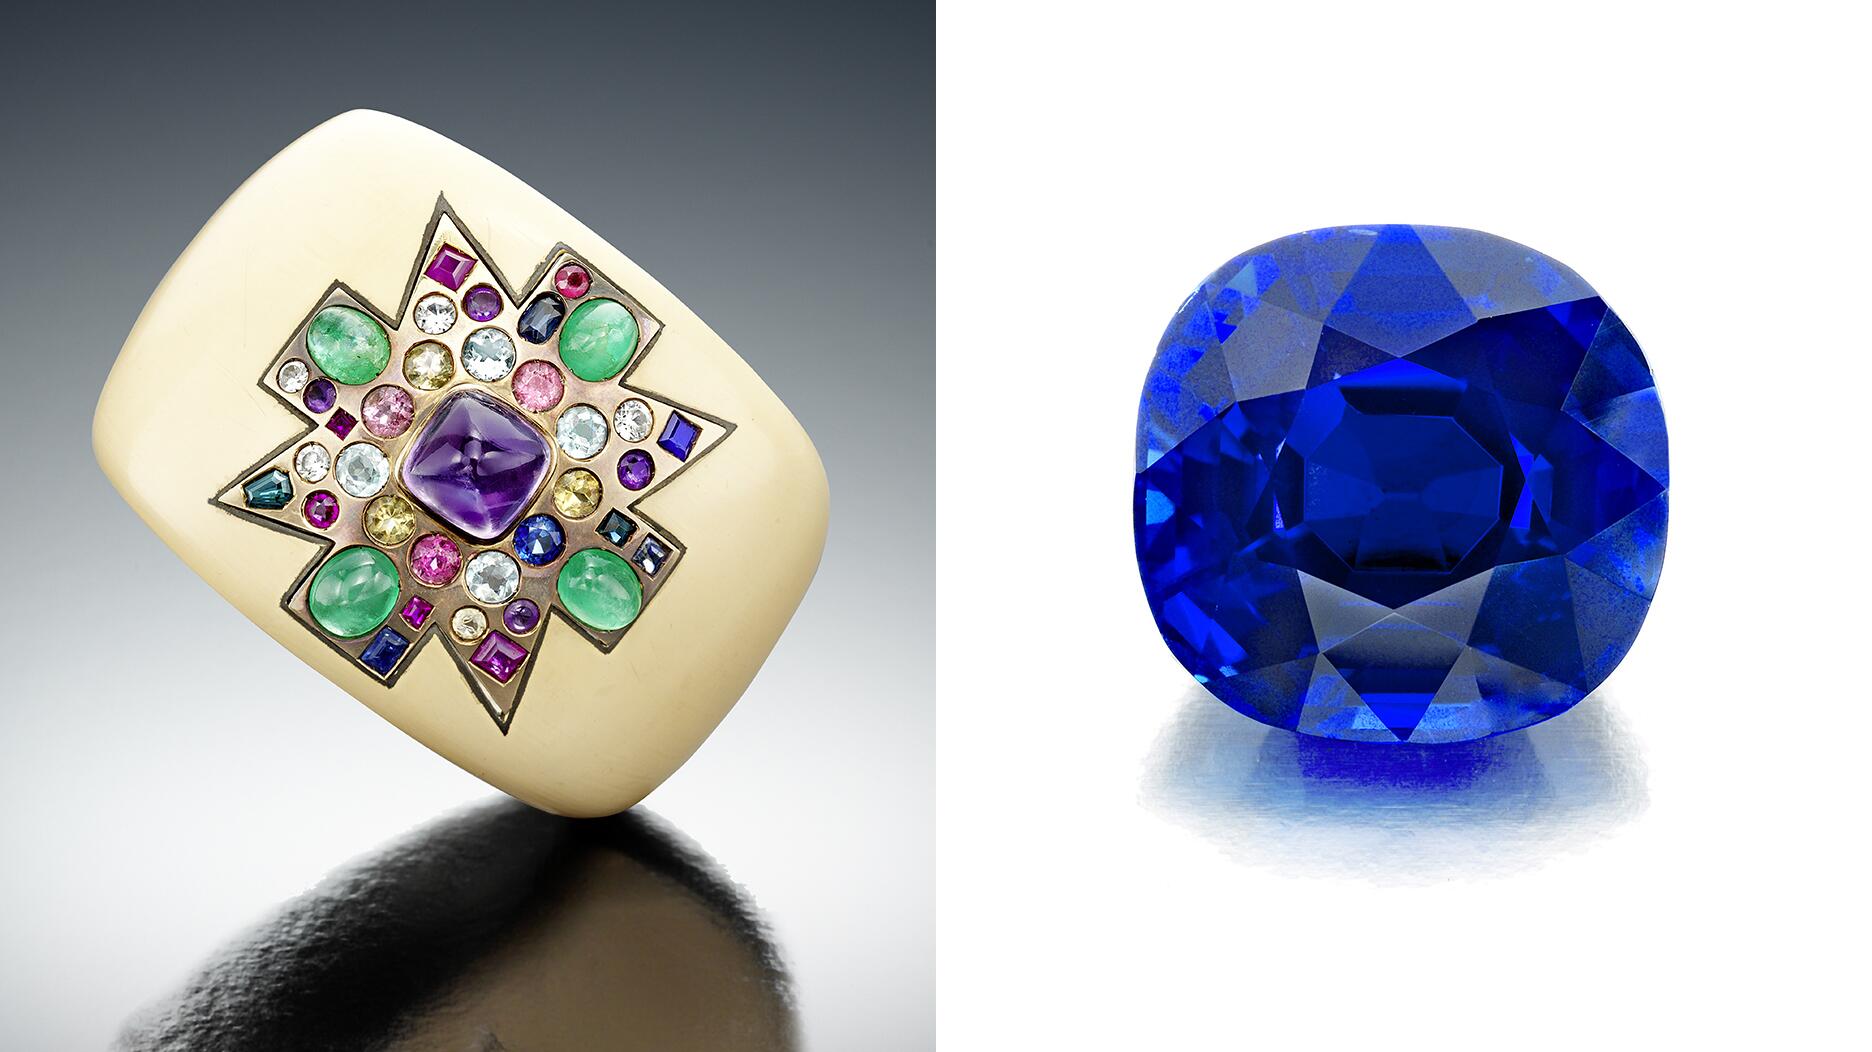 A 1930s gem-set and enamel ‘Maltese cross’ cuff attributed to Verdura for Chanel (left) and a loose cushion-cut Burmese sapphire weighing 11.87 carats (right) were the top lots in Bonhams New York Jewels auction this week.